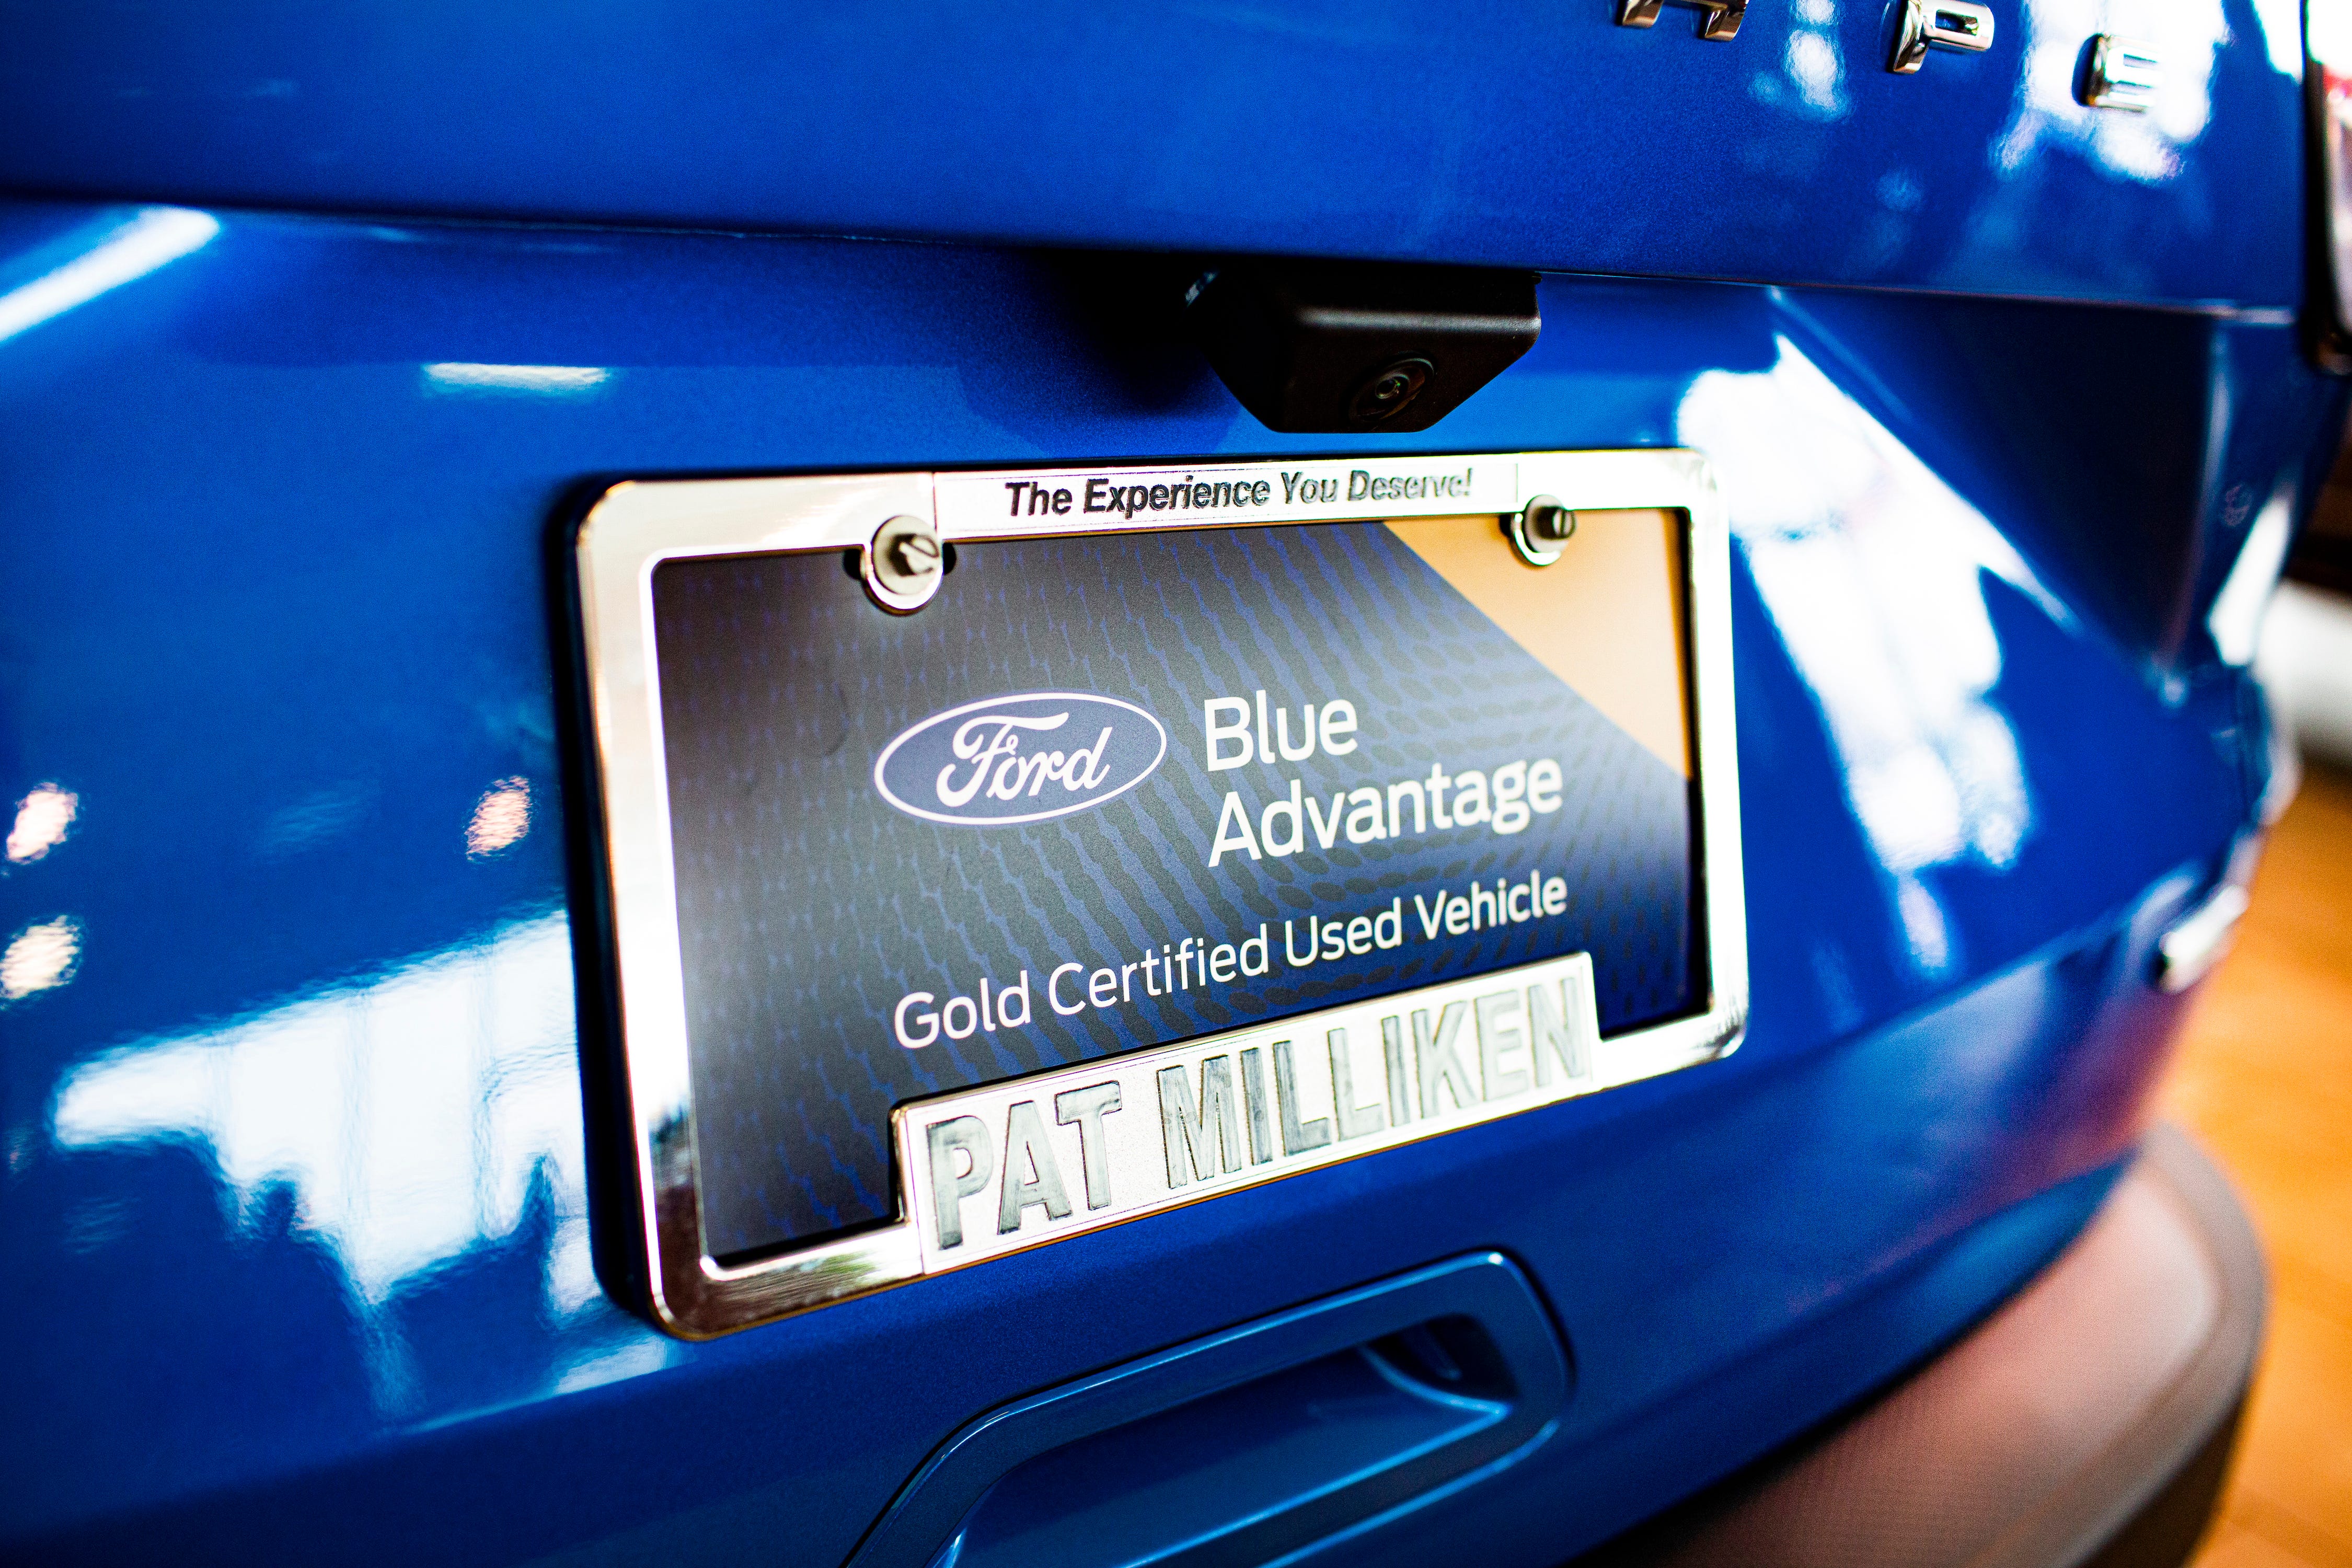 Ford on Thursday launched a new digital marketplace called Ford Blue Advantage.